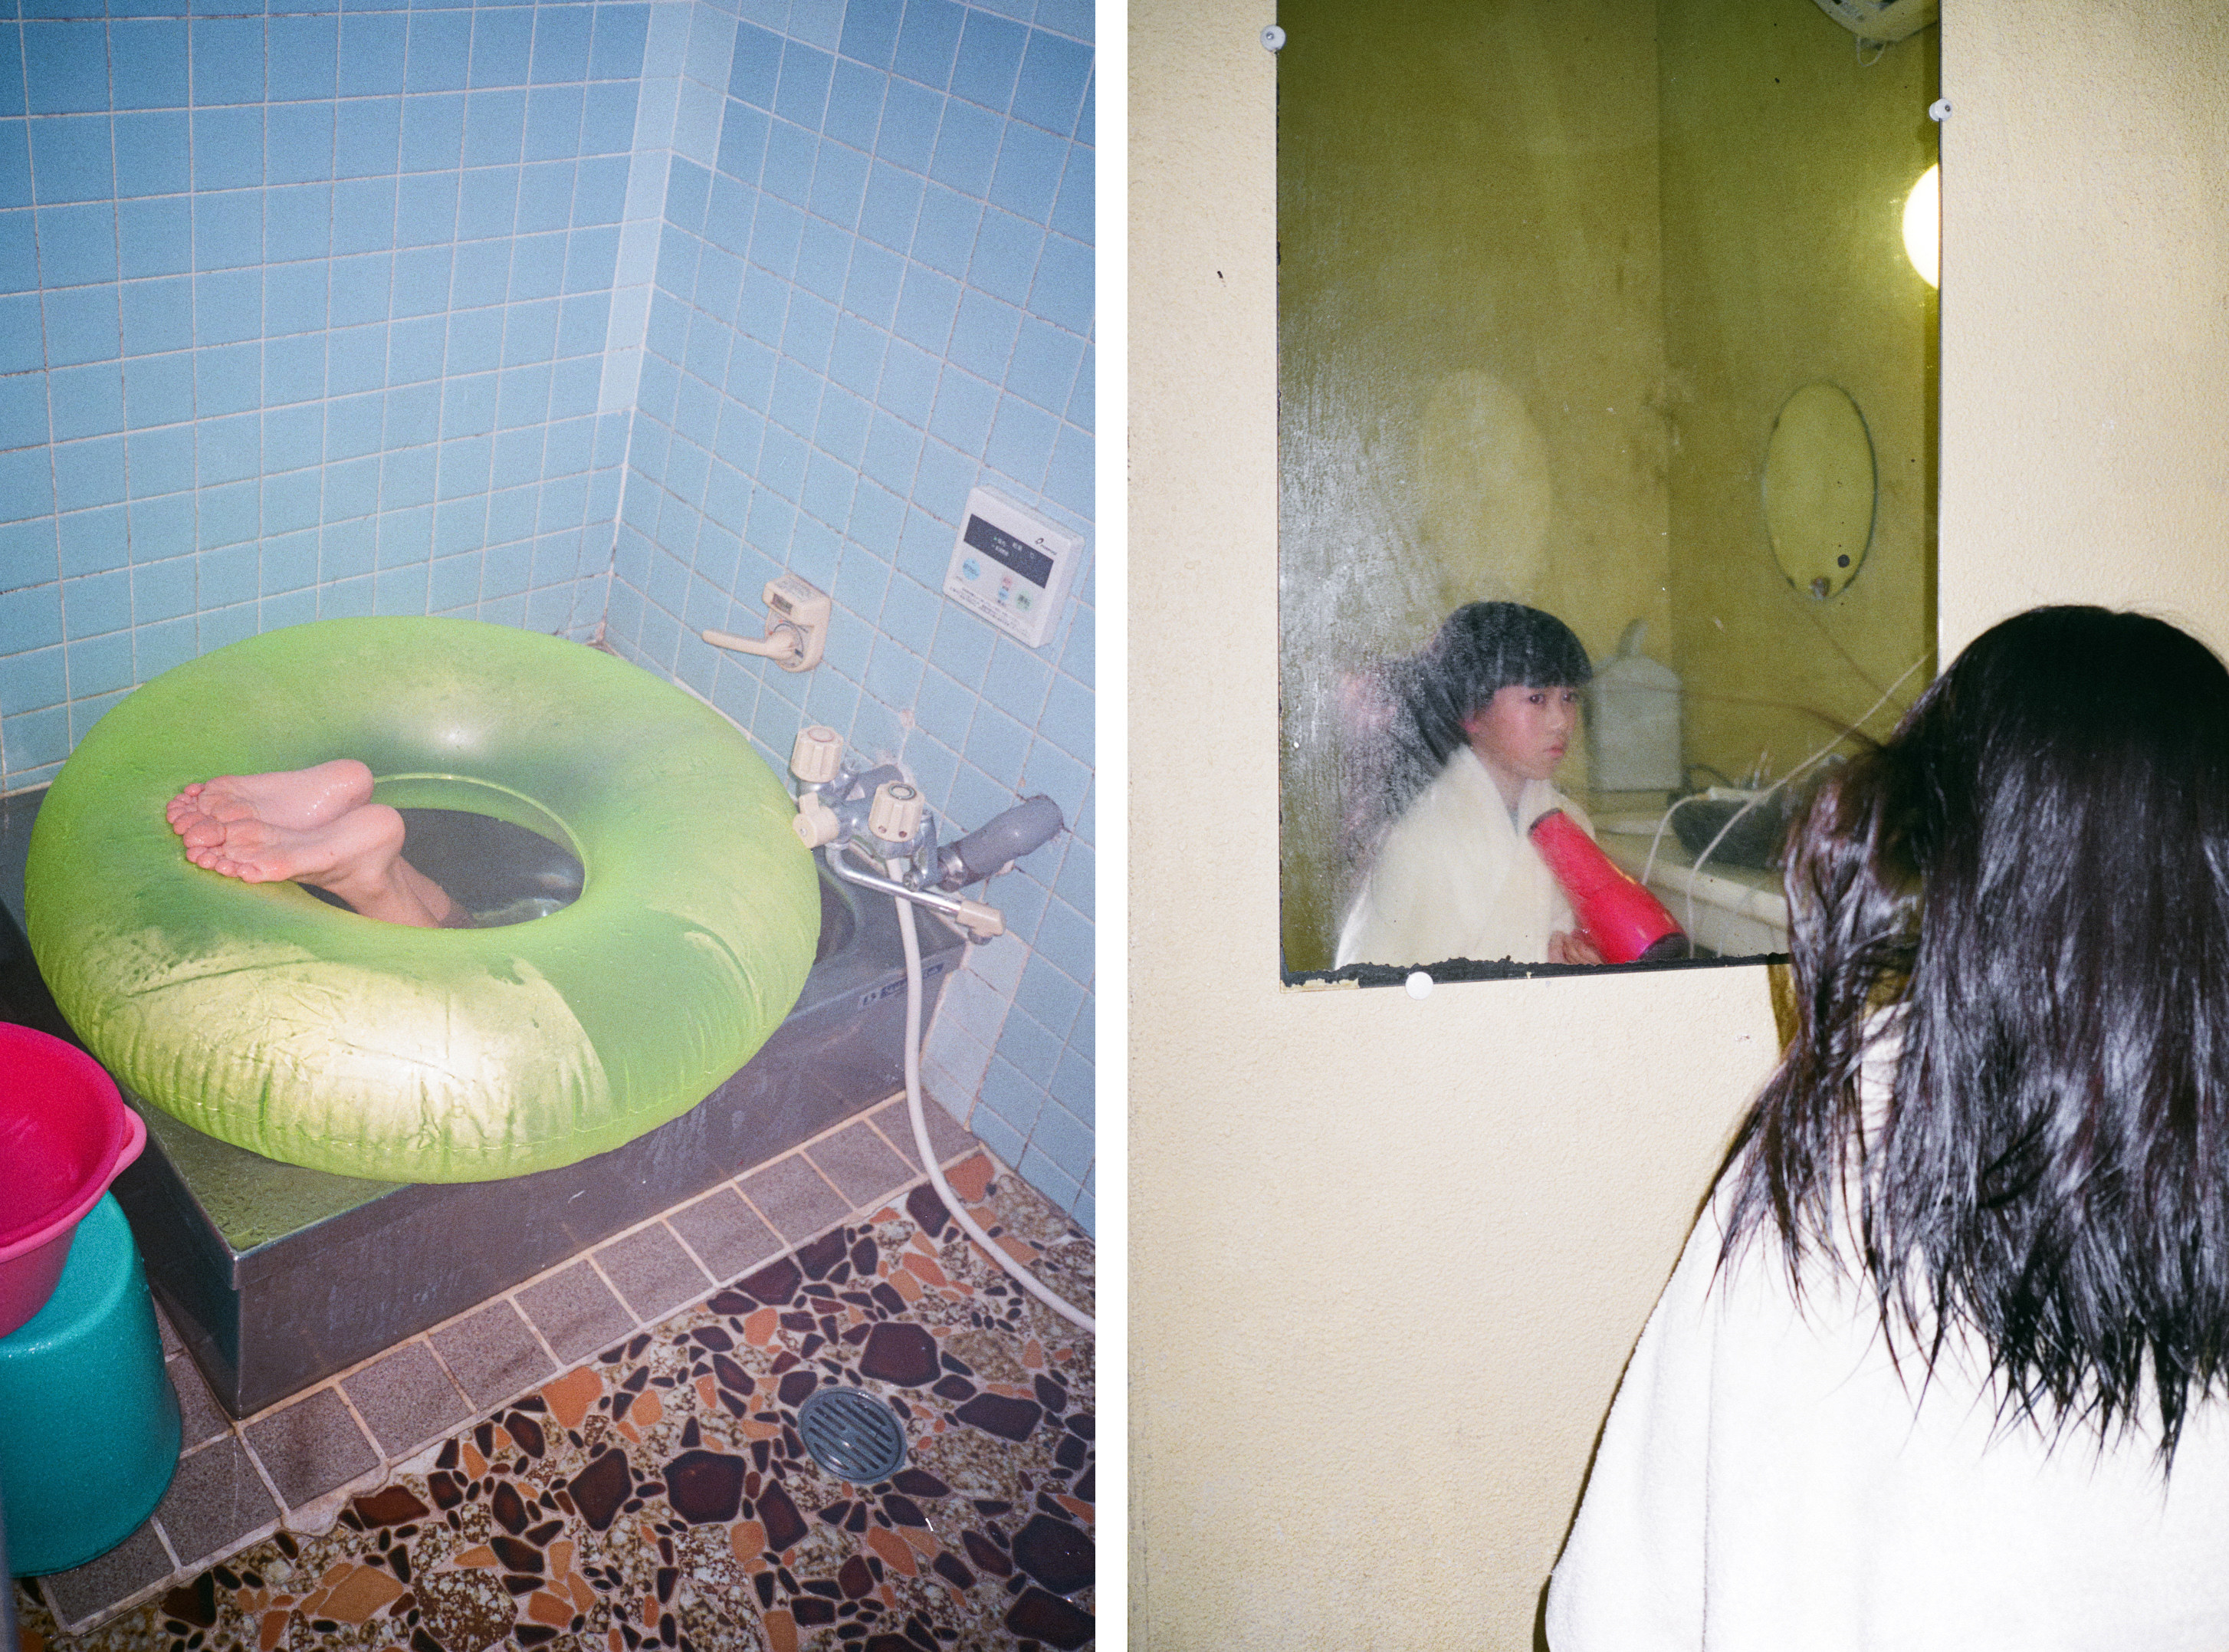 At left, a girl&#x27;s feet stick out of an inner tube over a bathtub; on the right, a girl blow-dries her hair in the mirror